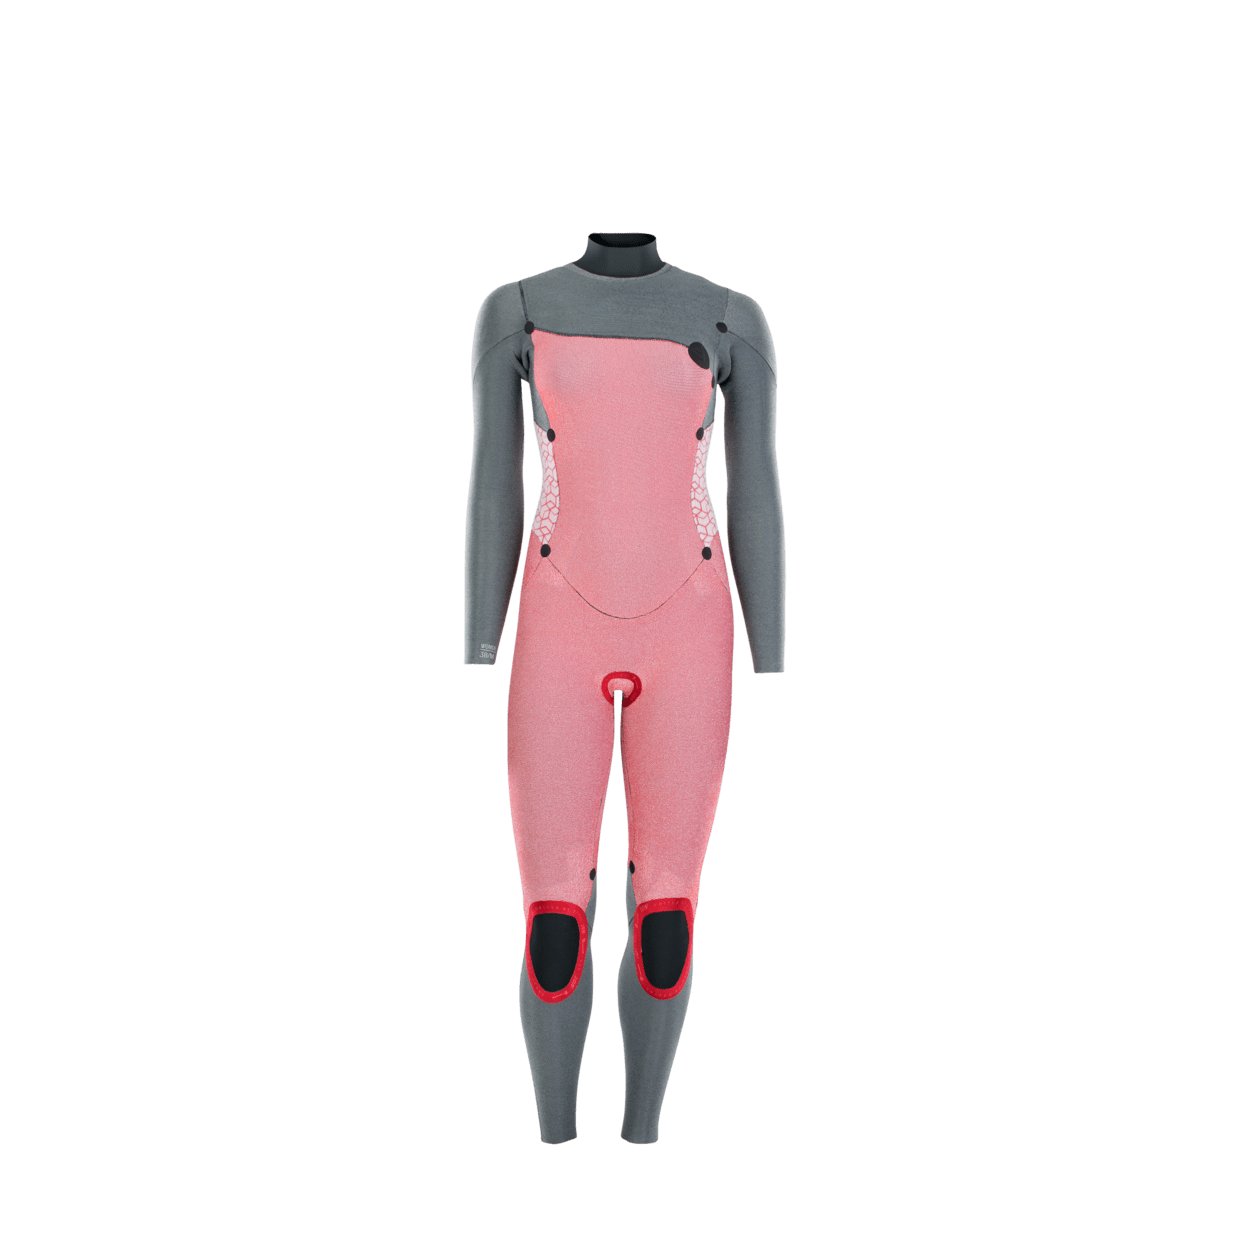 ION Amaze Core 4/3 Front Zip 2022 - Worthing Watersports - 9010583058023 - Wetsuits - ION Water